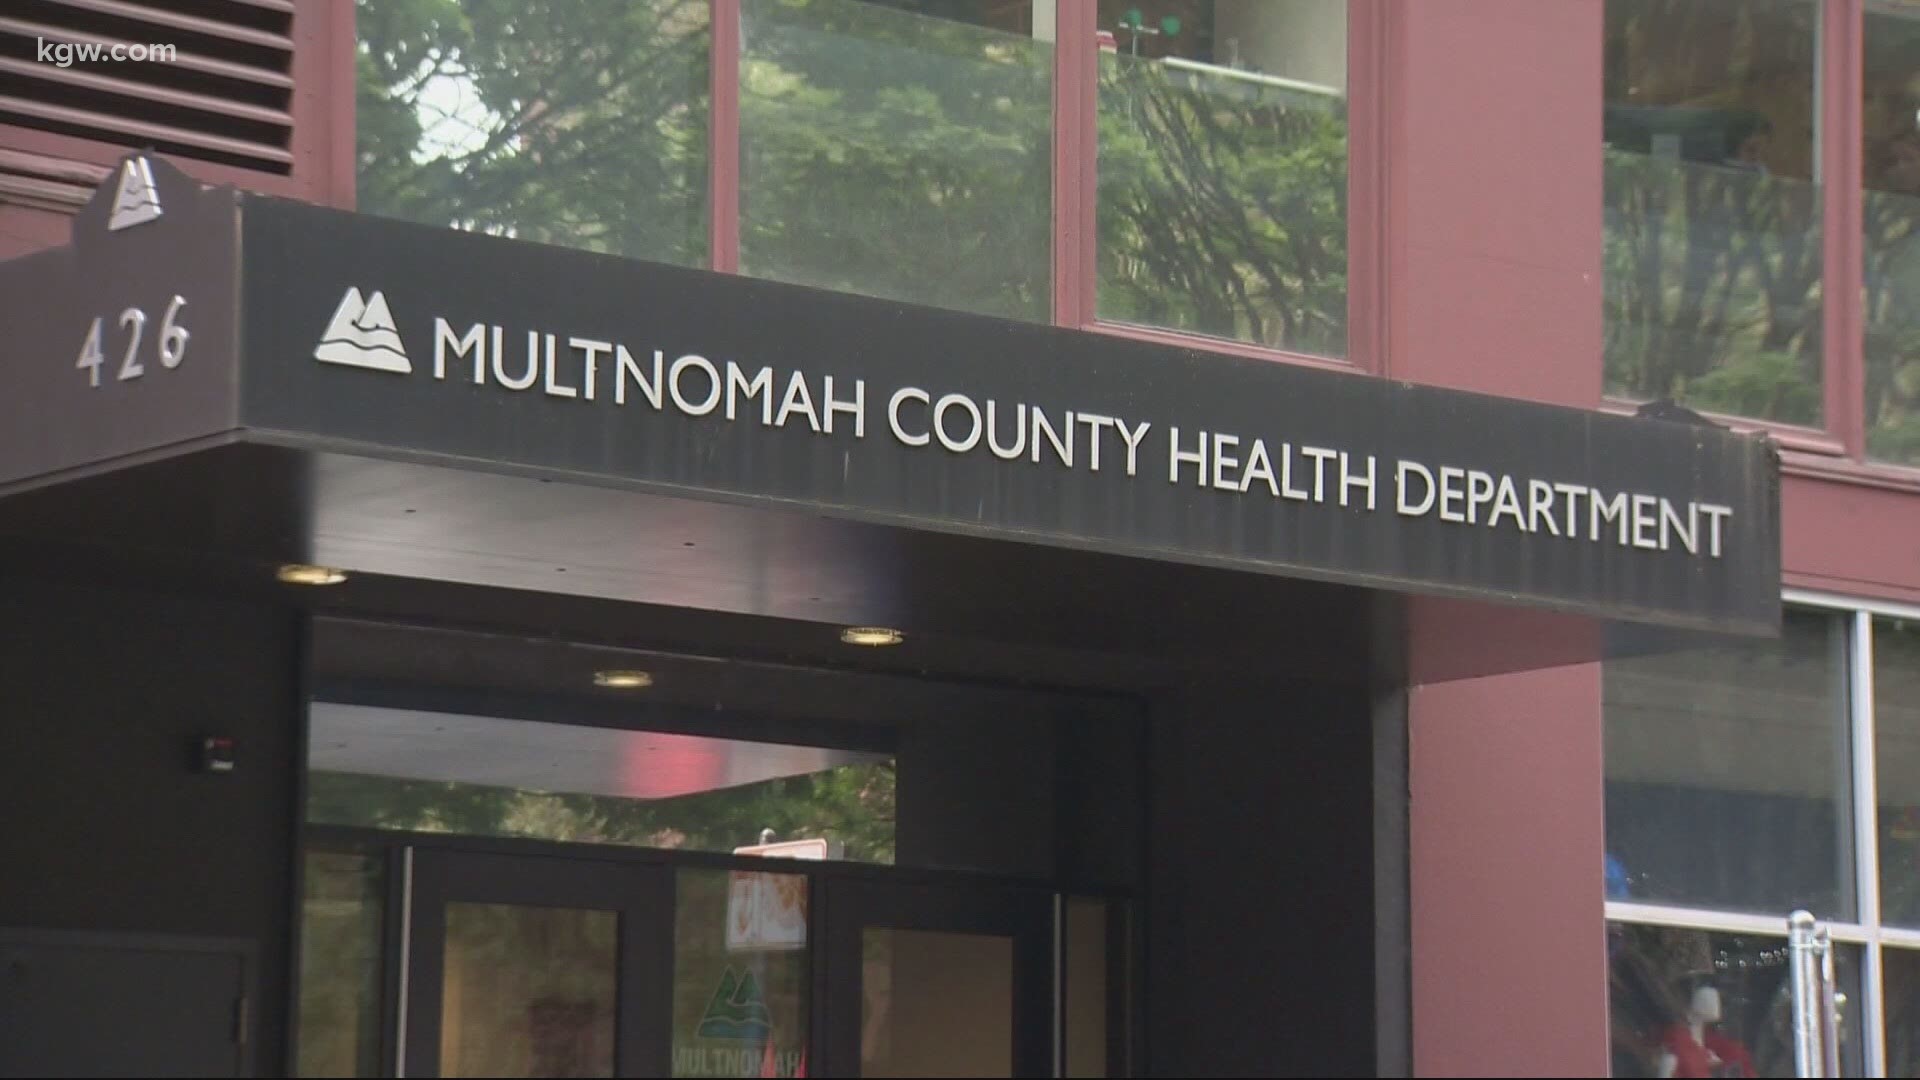 Social gatherings among young people are driving the rapid spread of coronavirus in Multnomah County, the health officer says. Pat Dooris reports.